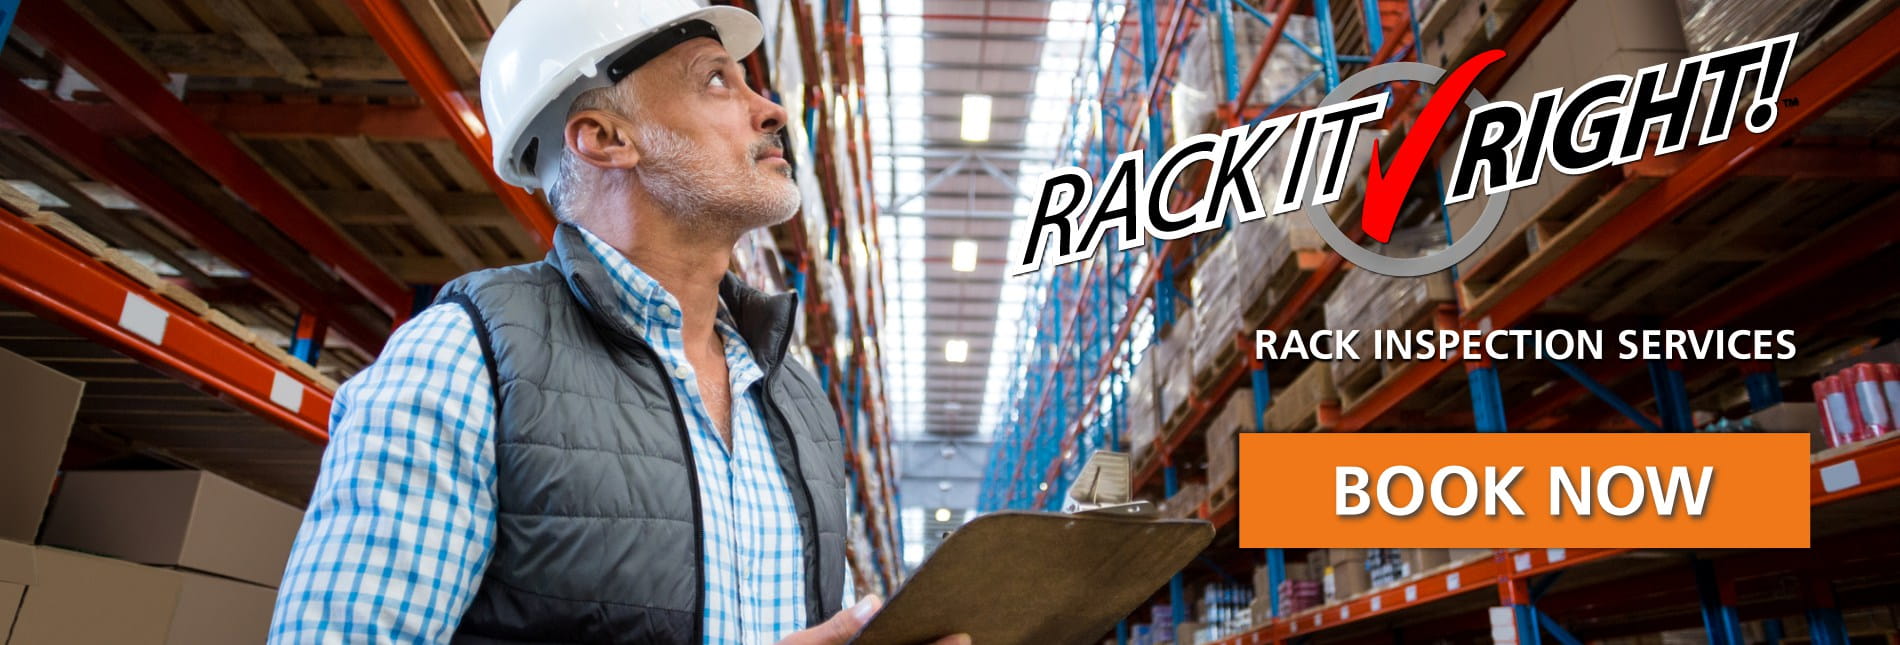 Rack-It-Right Rack Inspection Services